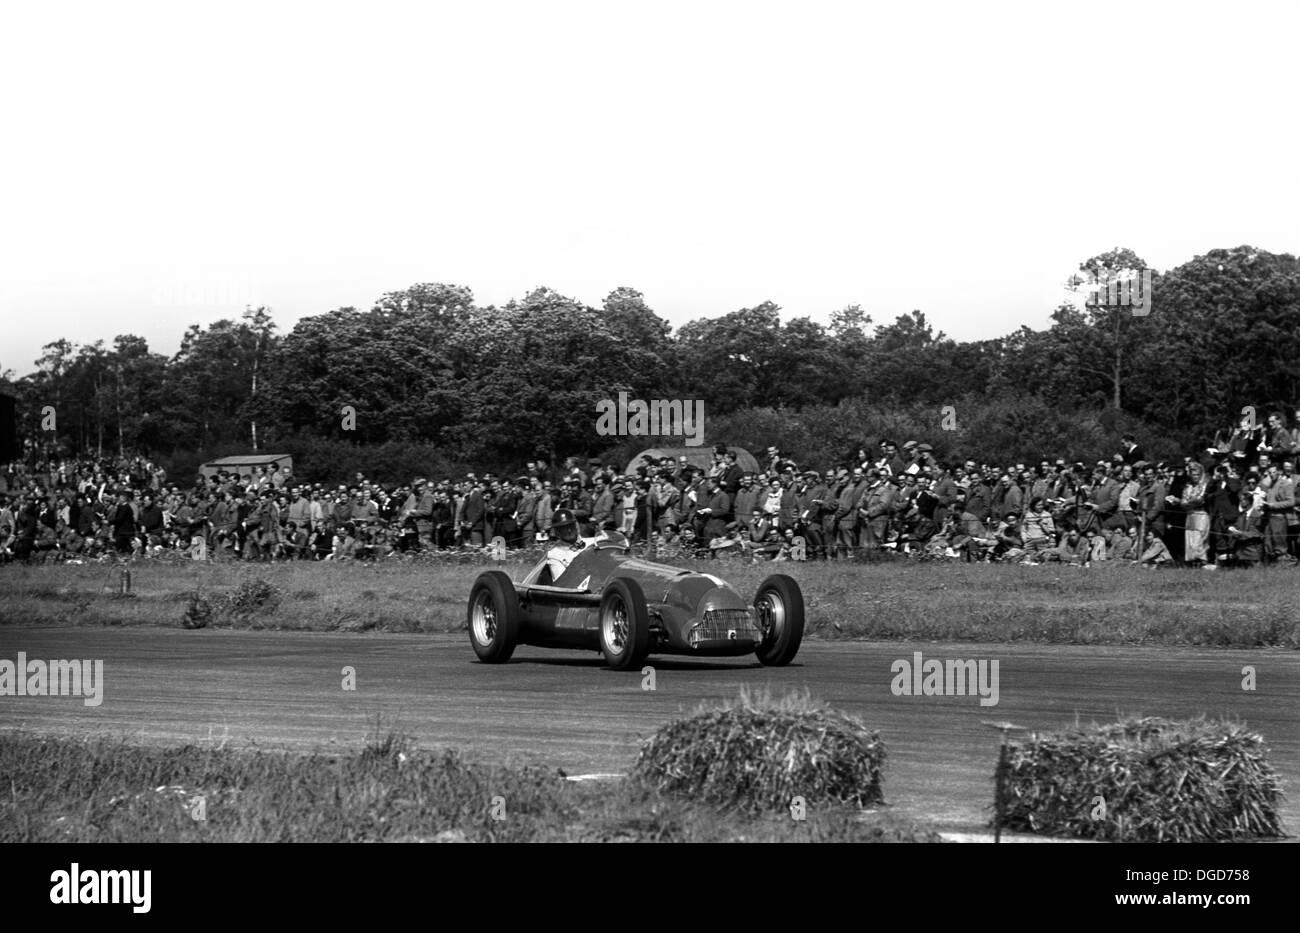 An Alfa Romeo 158 Alfetta competing in the International Trophy at Silverstone, England 1950. Stock Photo